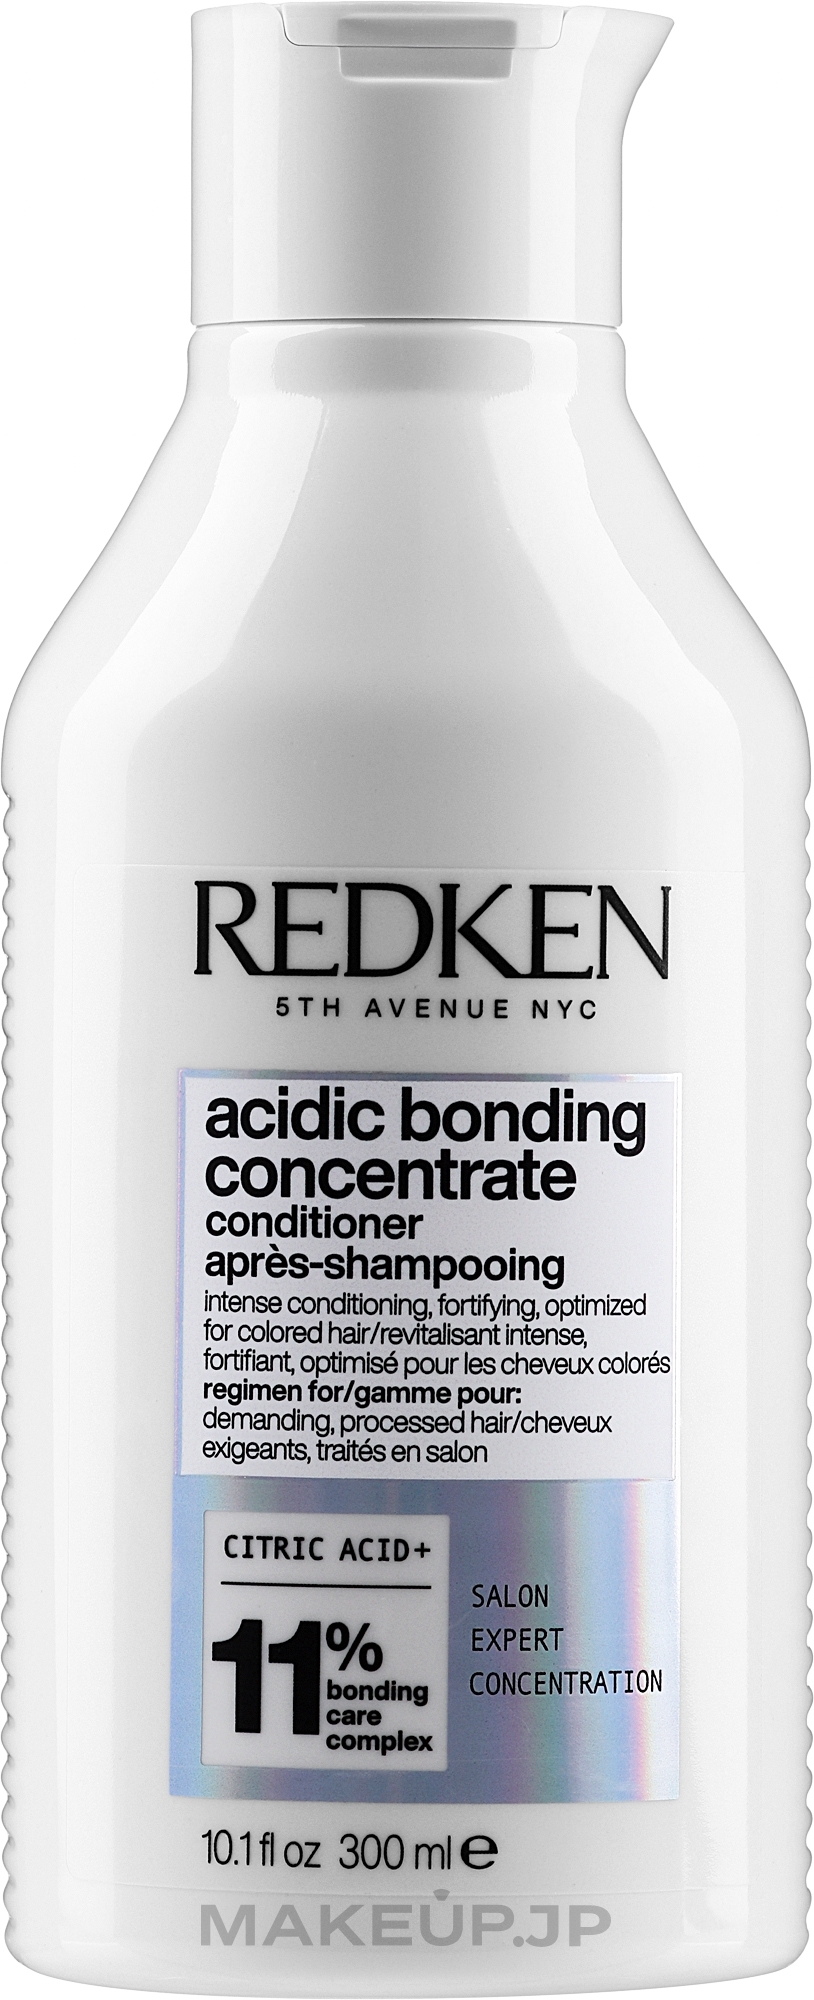 Intensive Care Conditioner for Chemically Treated Hair - Redken Acidic Bonding Concentrate Conditioner — photo 300 ml